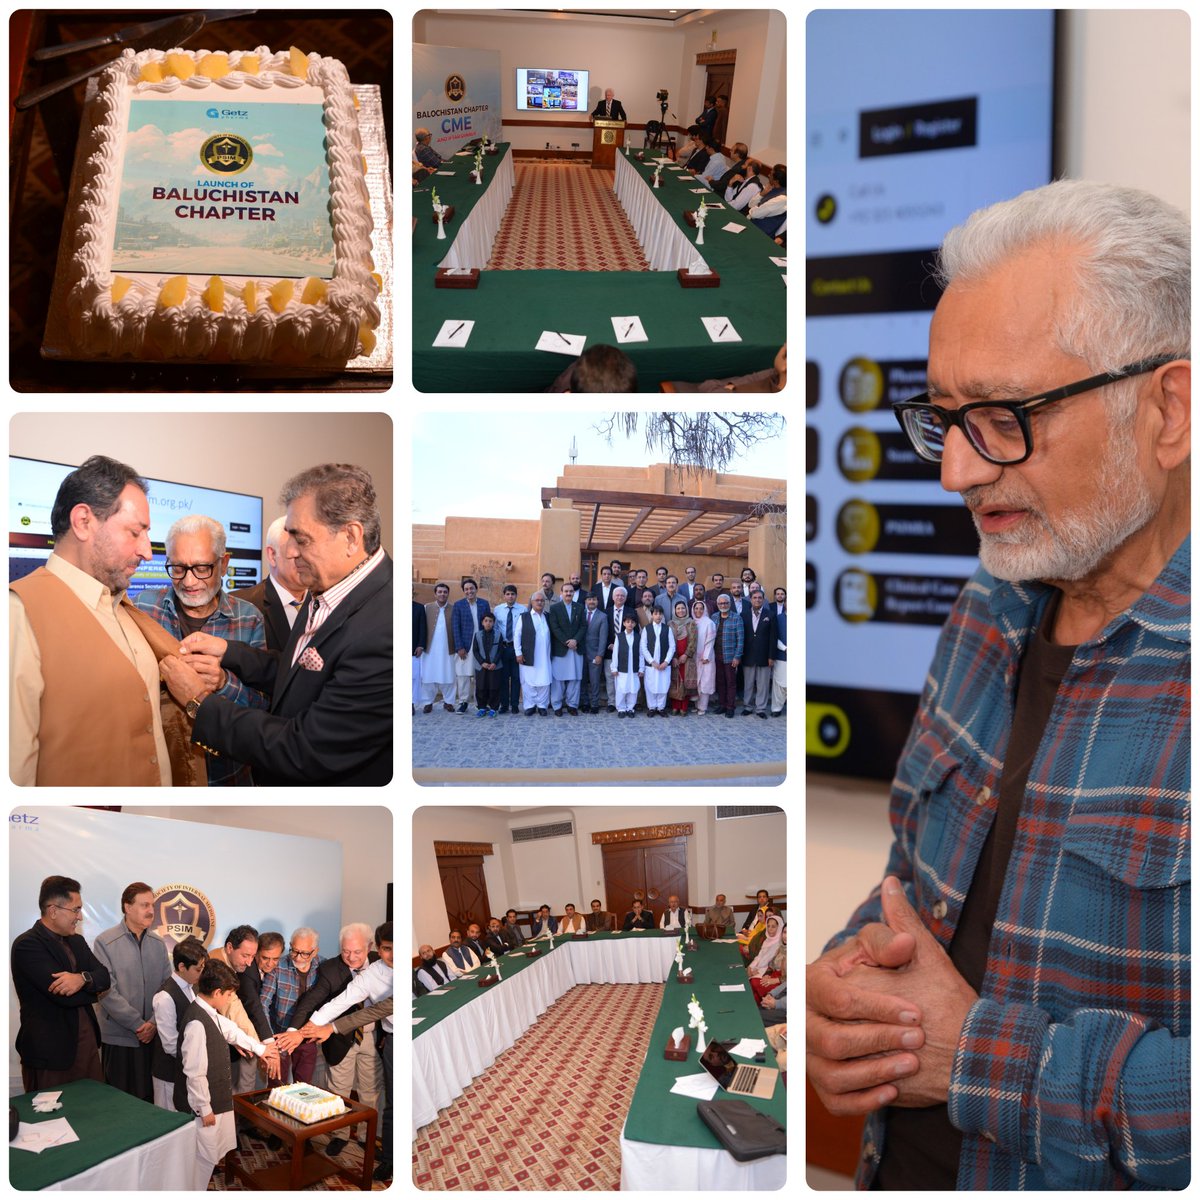 The launch of the Balochistan chapter of PSIM at the Iftaar event at Serena Quetta was a resounding success. Prof. Khalid Shah chaired the scientific session, bringing his expertise as the founding president of the Balochistan chapter of PSIM.